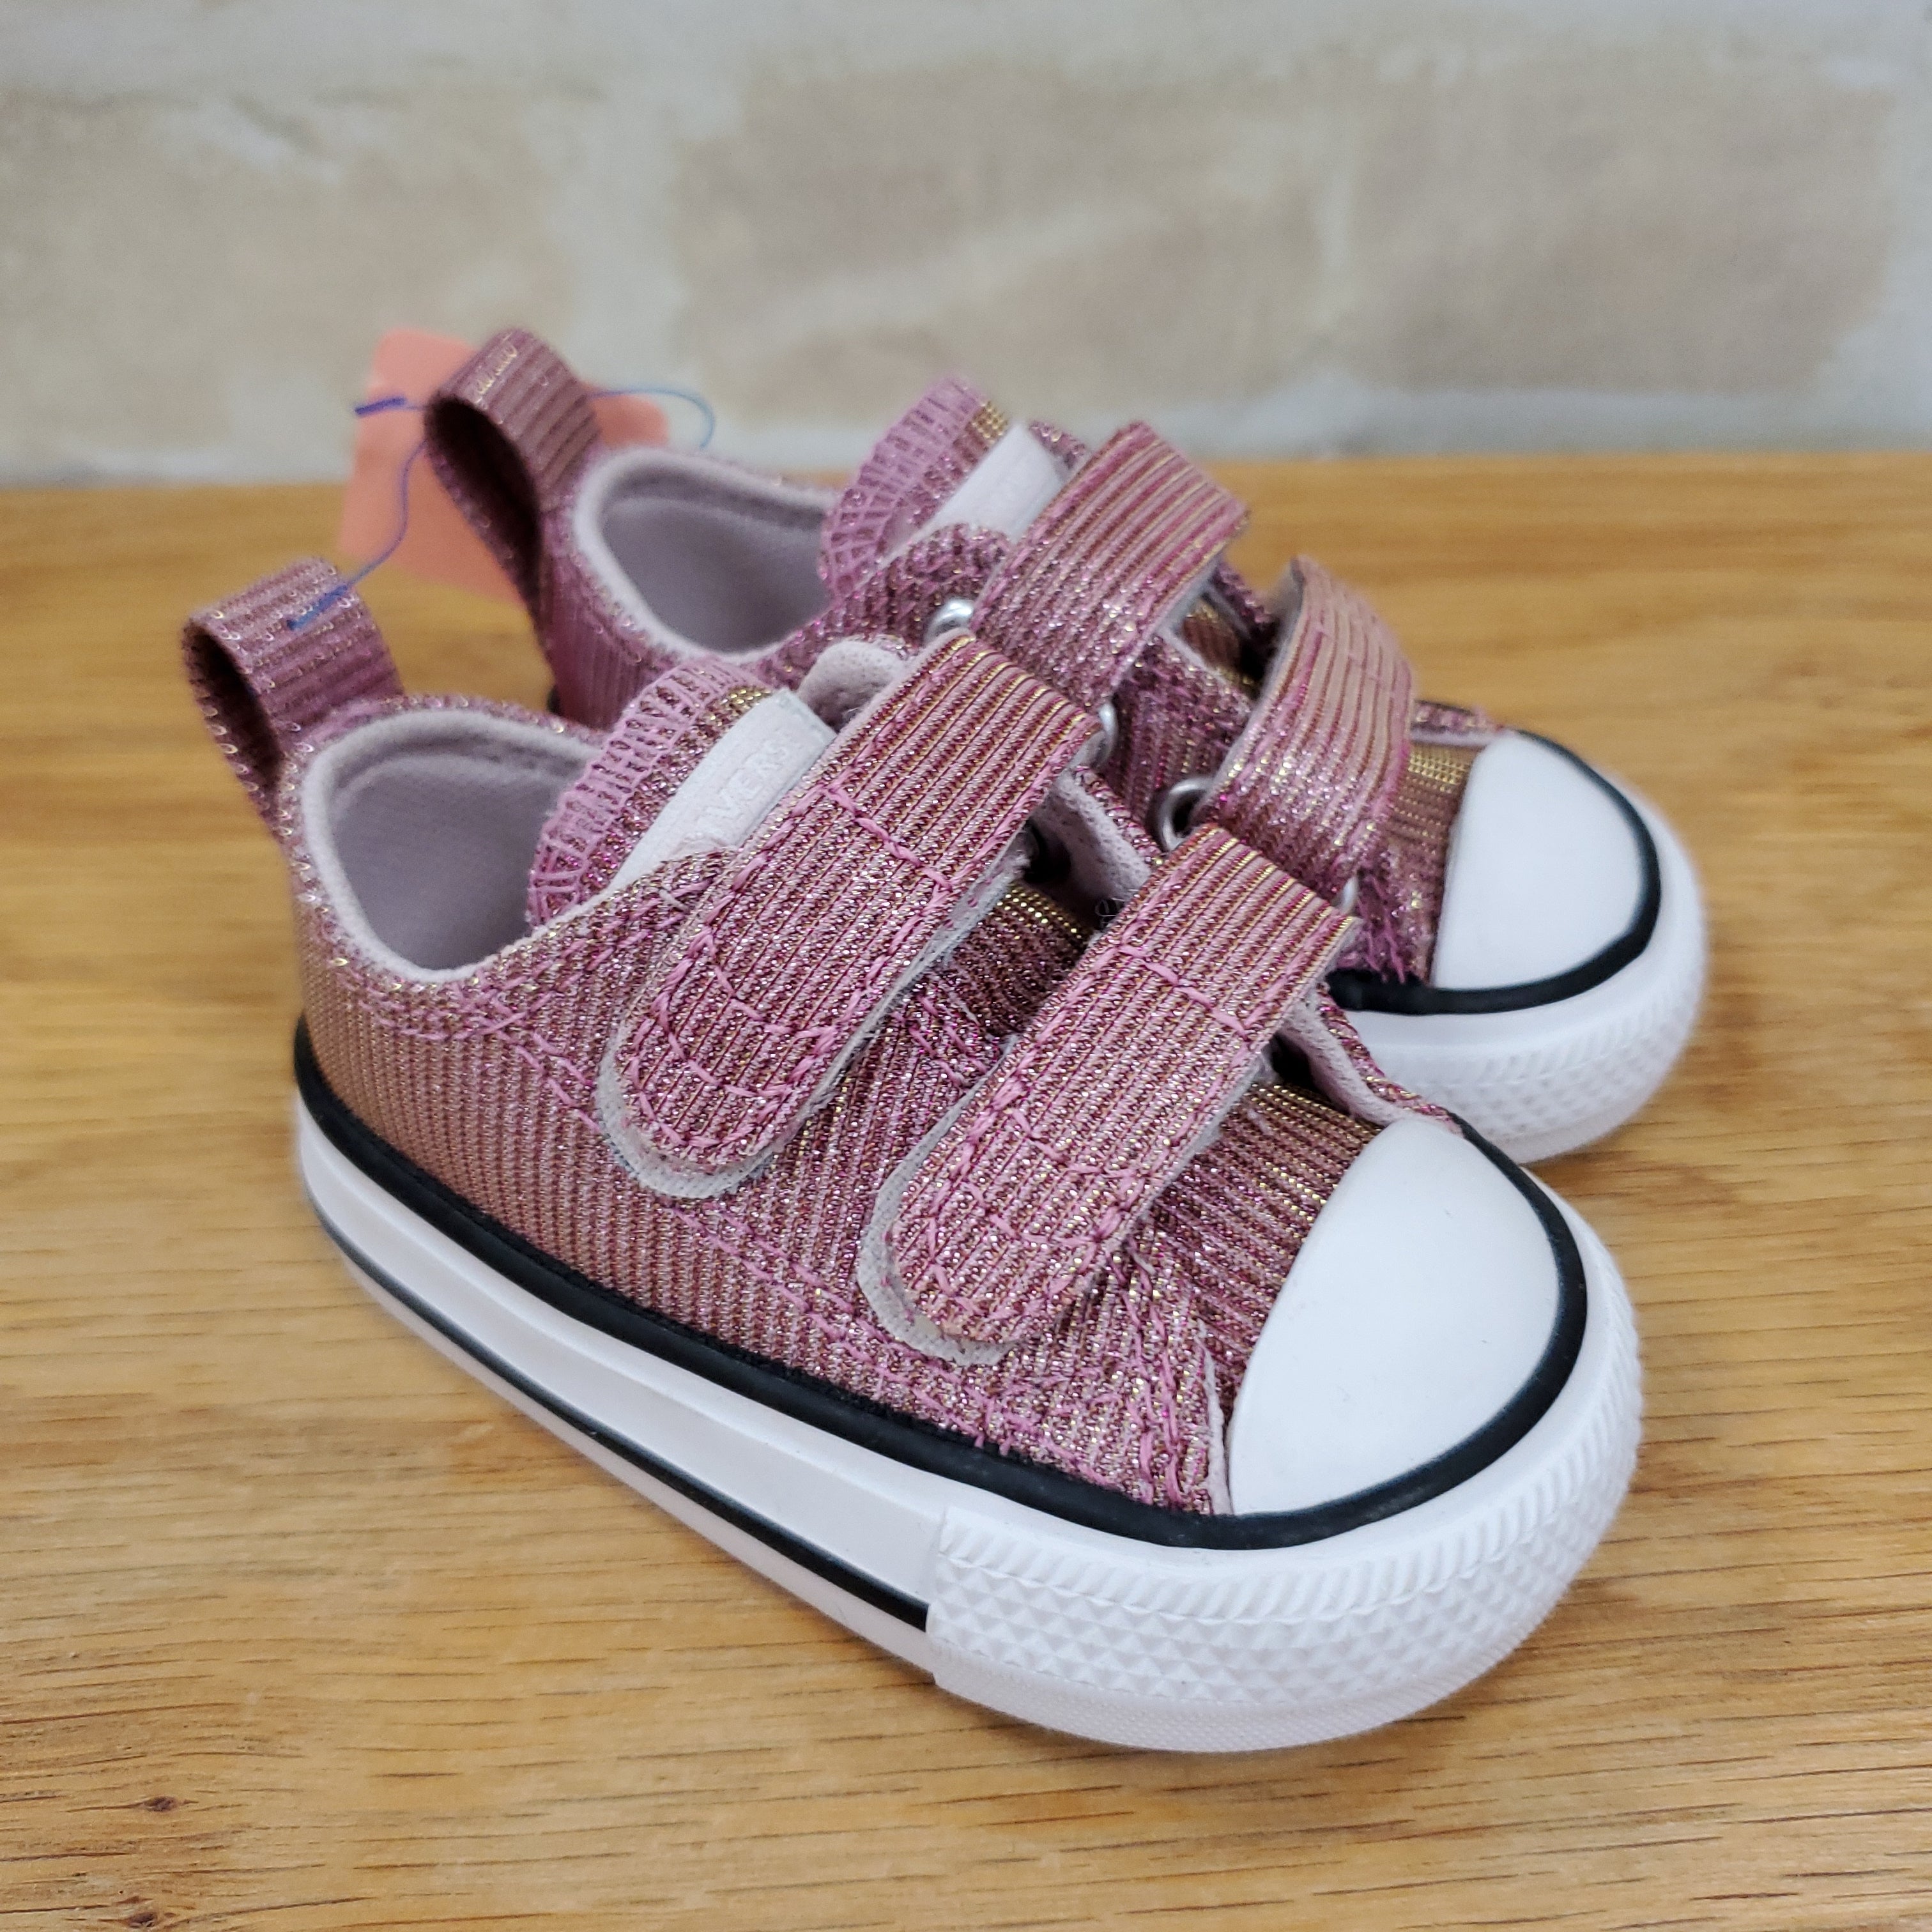 Converse girls sparkly pink velcro shoes 2